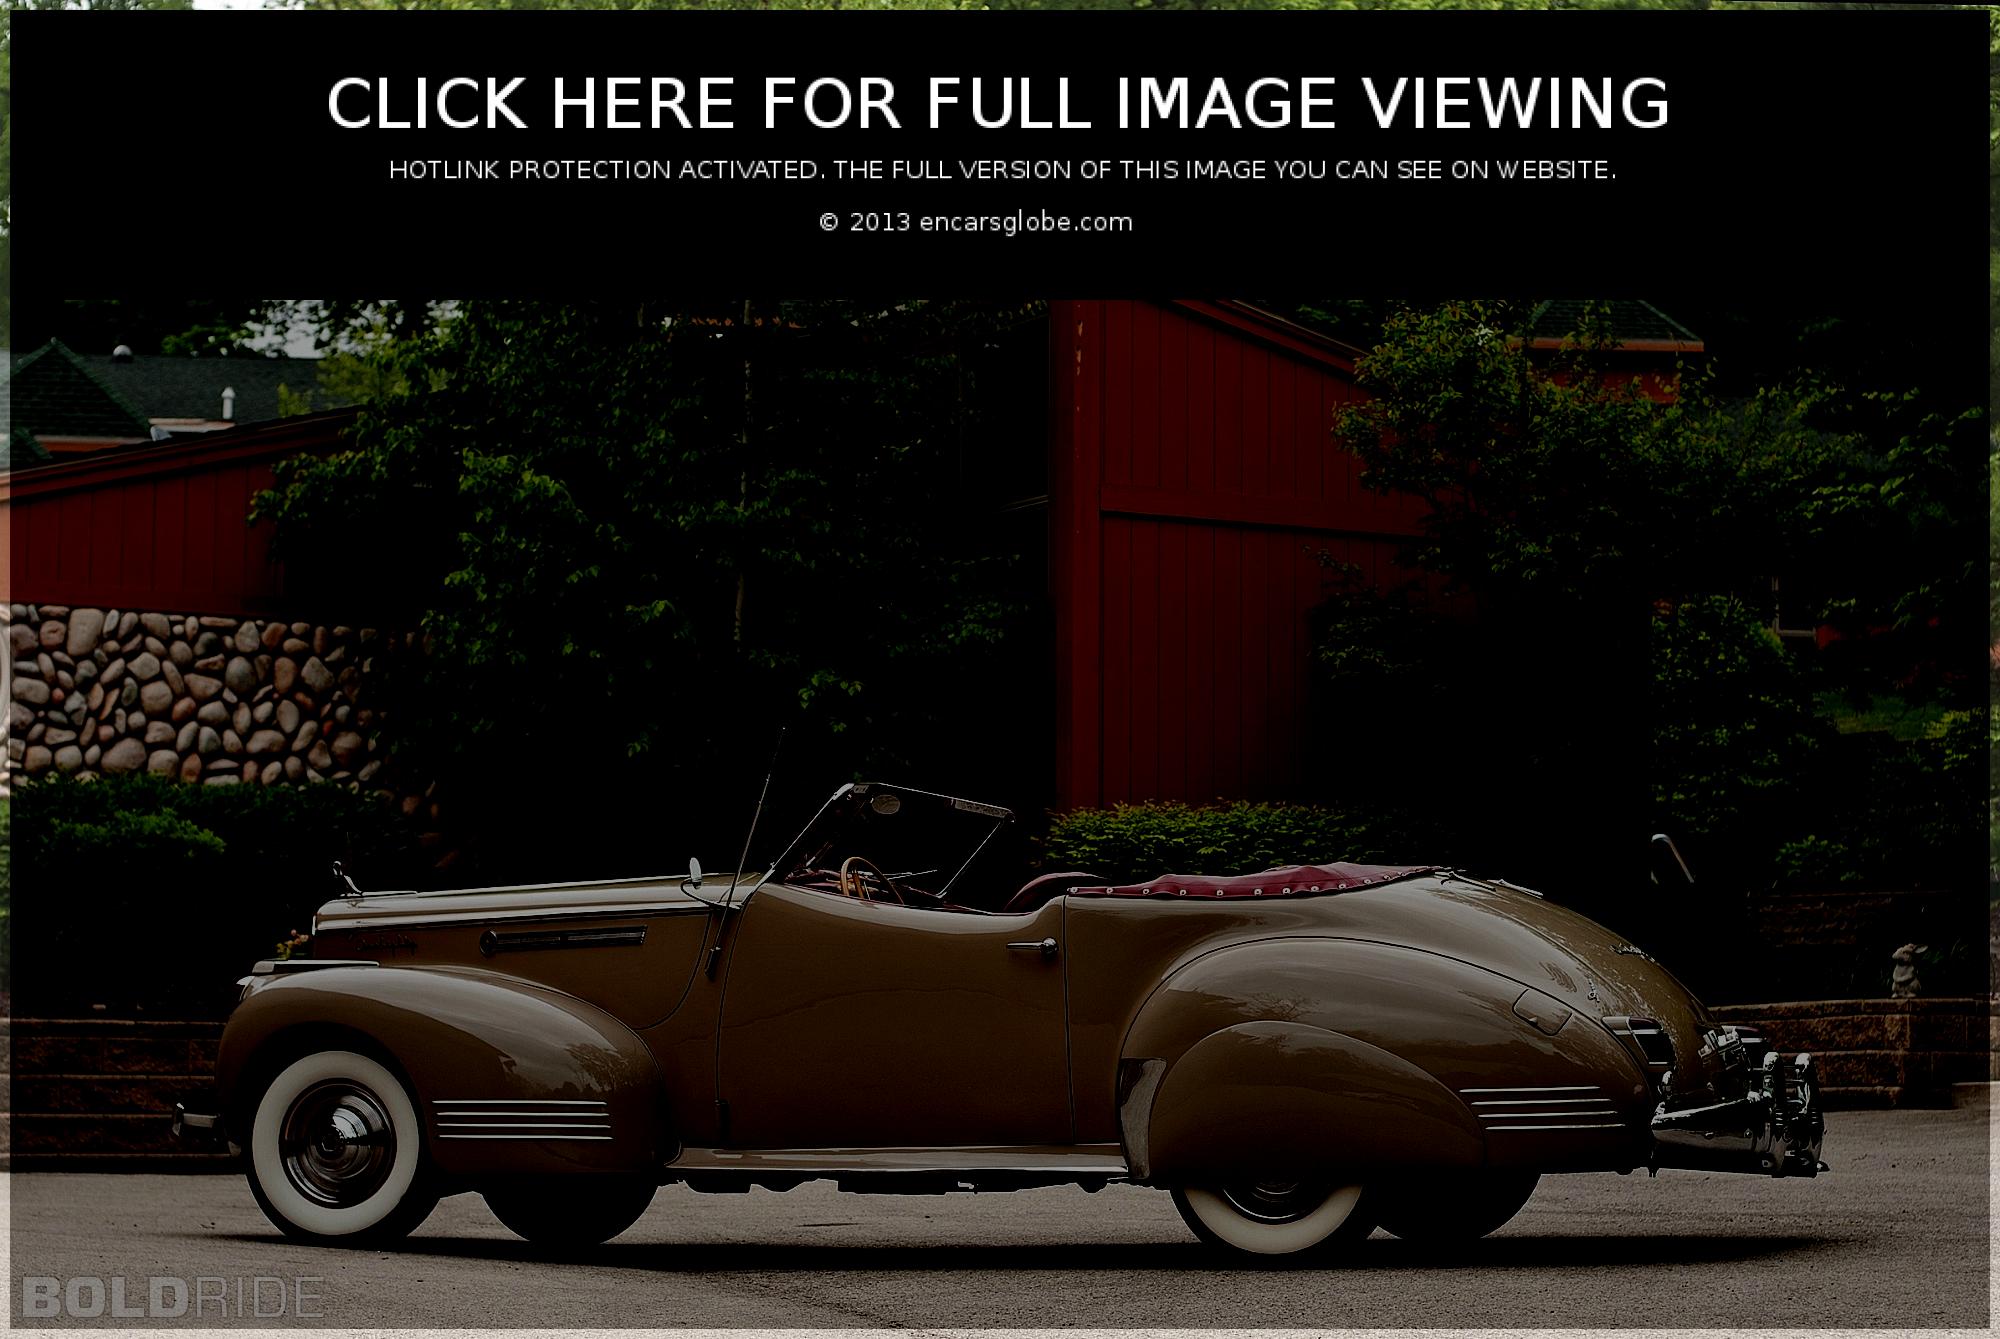 Packard 126 Photo Gallery: Photo #11 out of 9, Image Size - 400 x ...